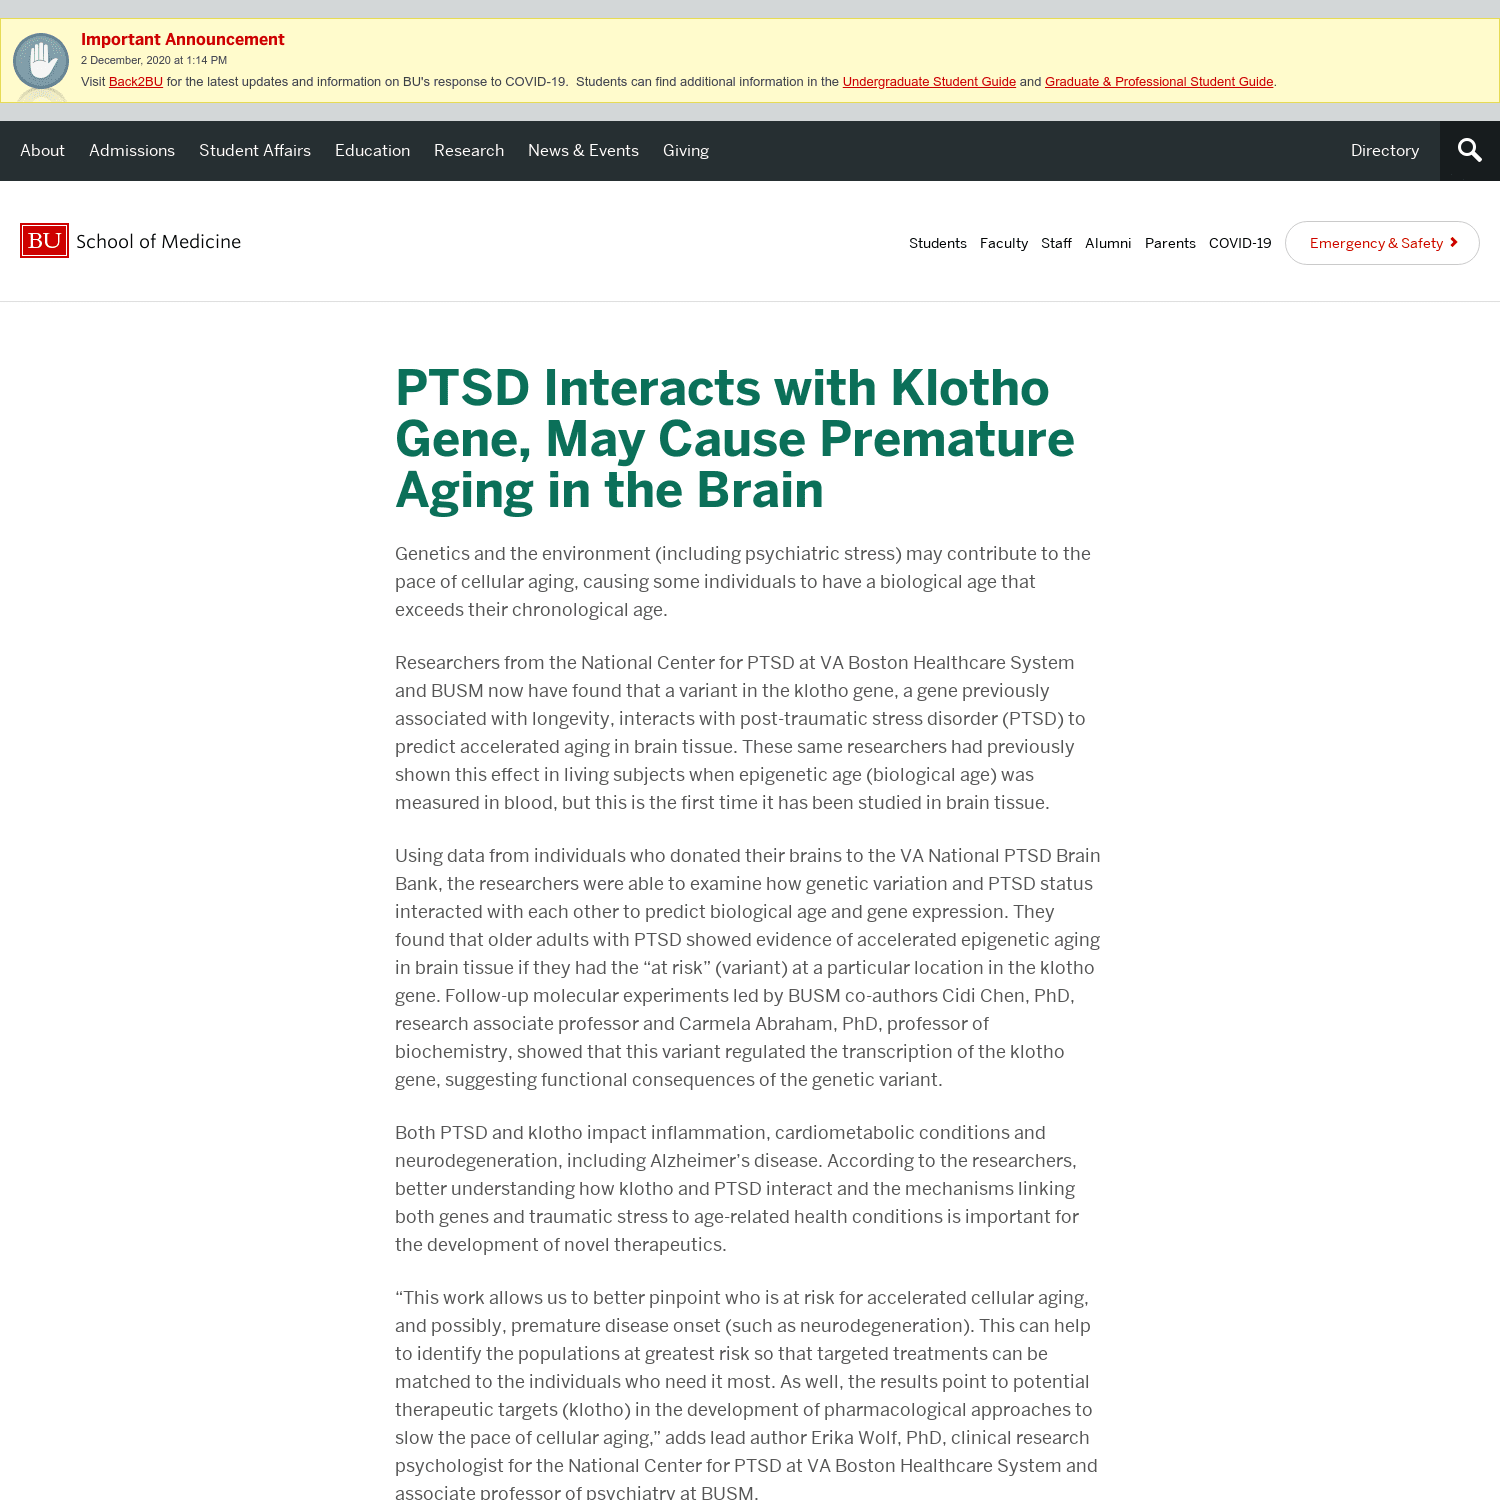 PTSD Interacts with Klotho Gene, May Cause Premature Aging in the Brain | School of Medicine